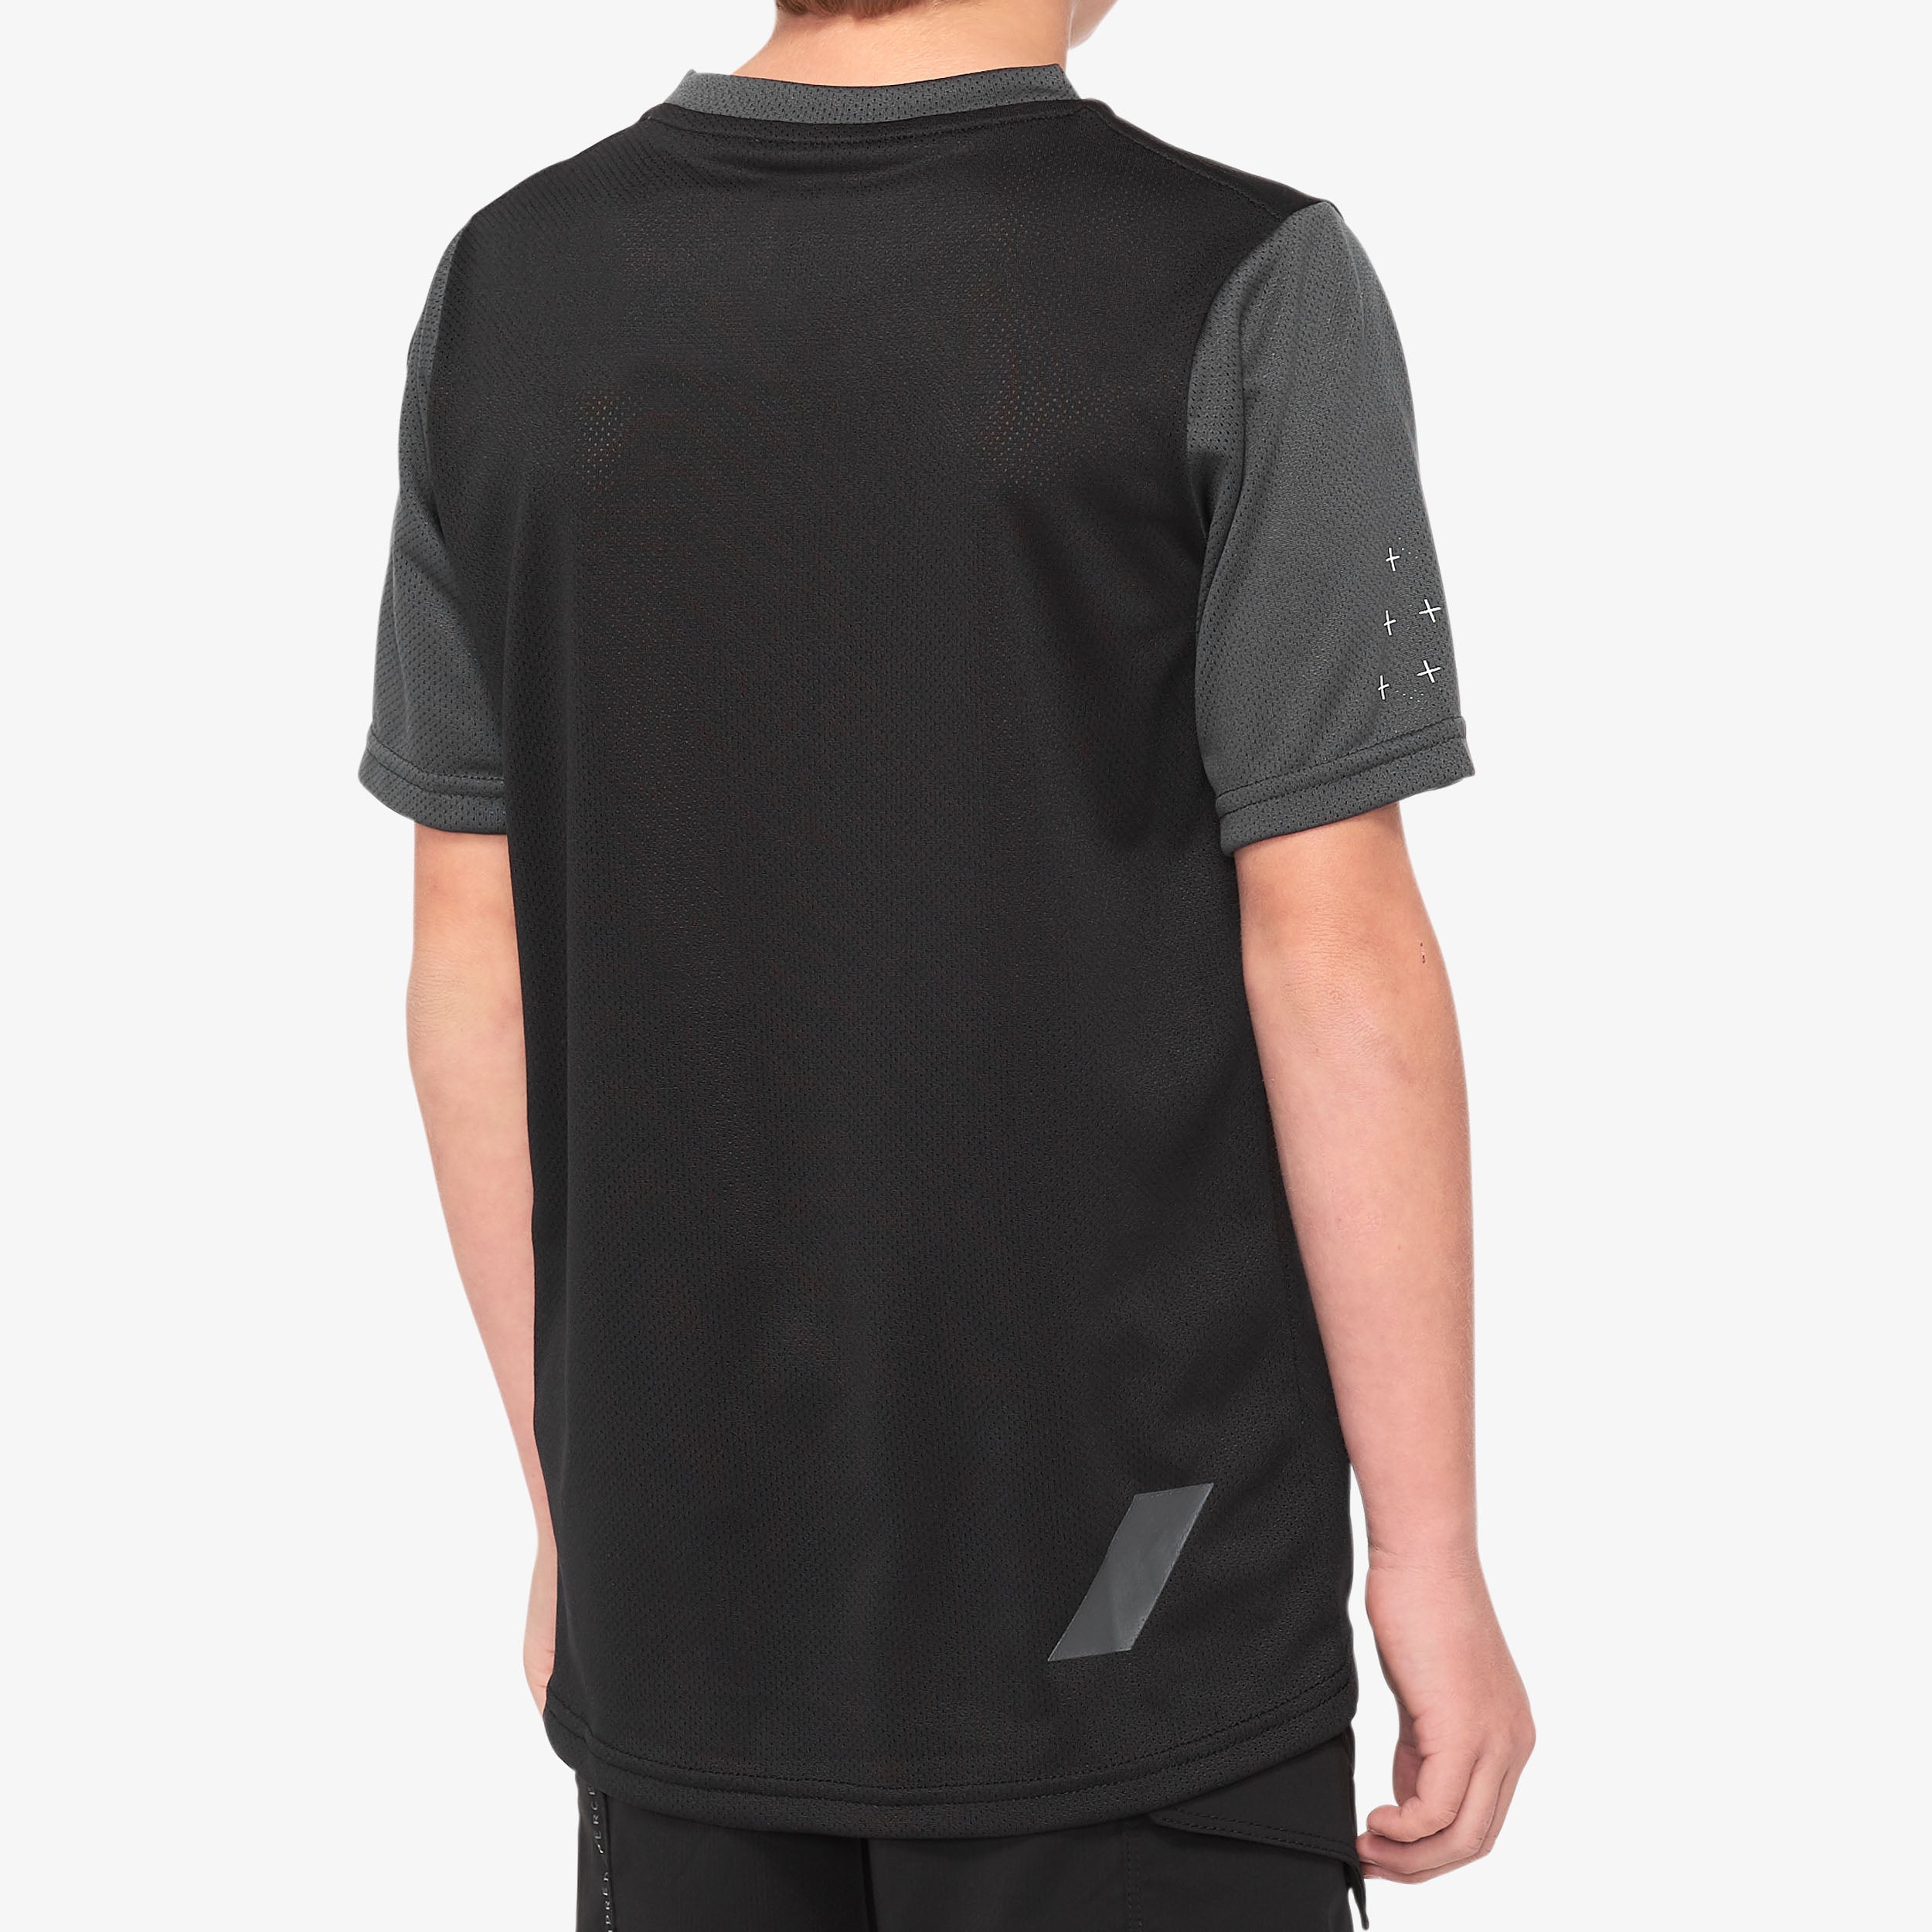 RIDECAMP Youth Short Sleeve Jersey Black/Charcoal